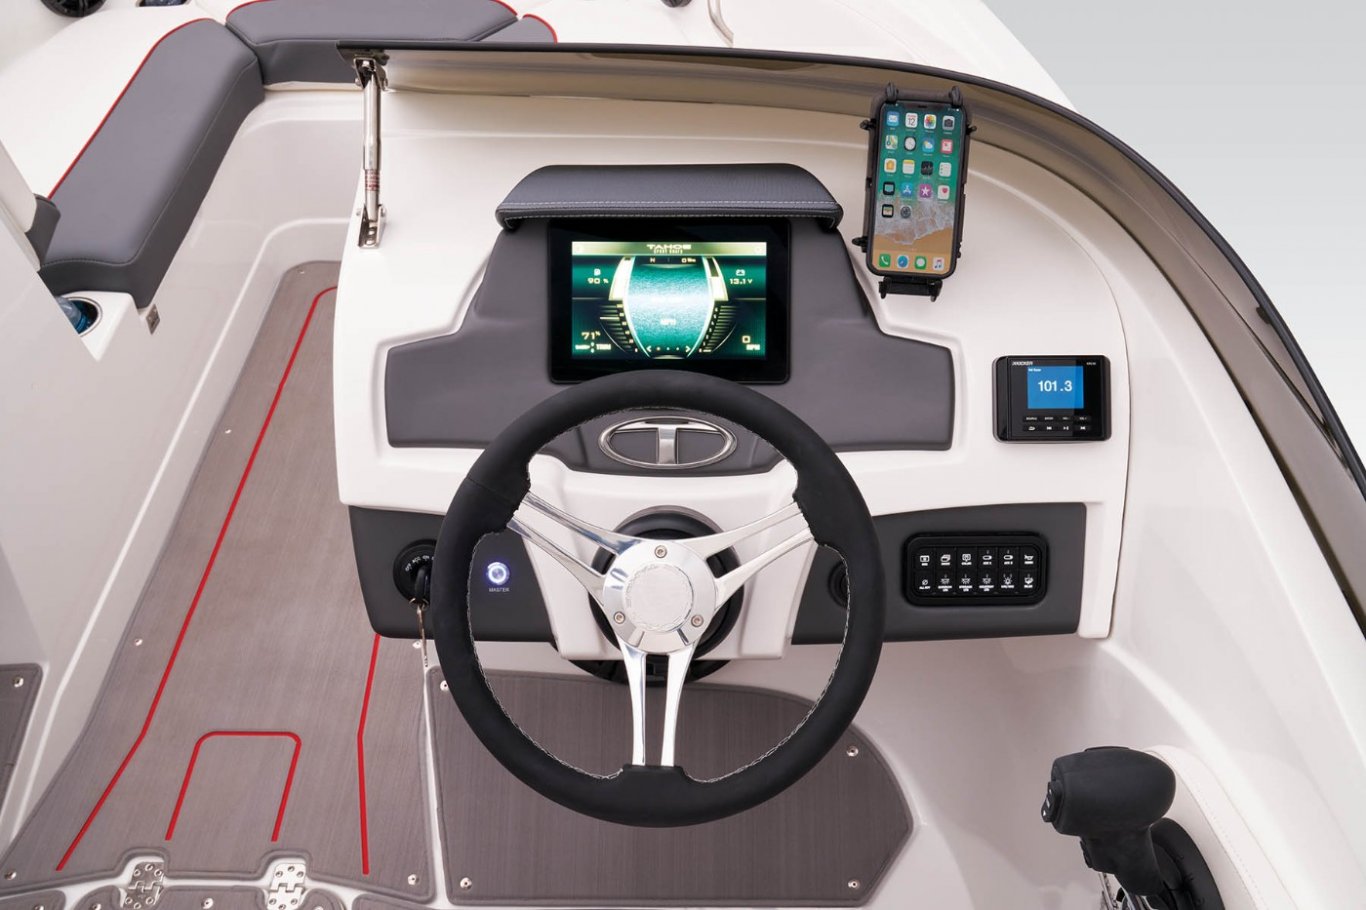 https://www.tahoeboats.com/content/dam/wrmg/tahoe/2023/sport-boats/210-s-limited/features/23_TA_210S-LIMITED_FA027.jpg/jcr:content/renditions/cq5dam.web.1400.1400.jpeg